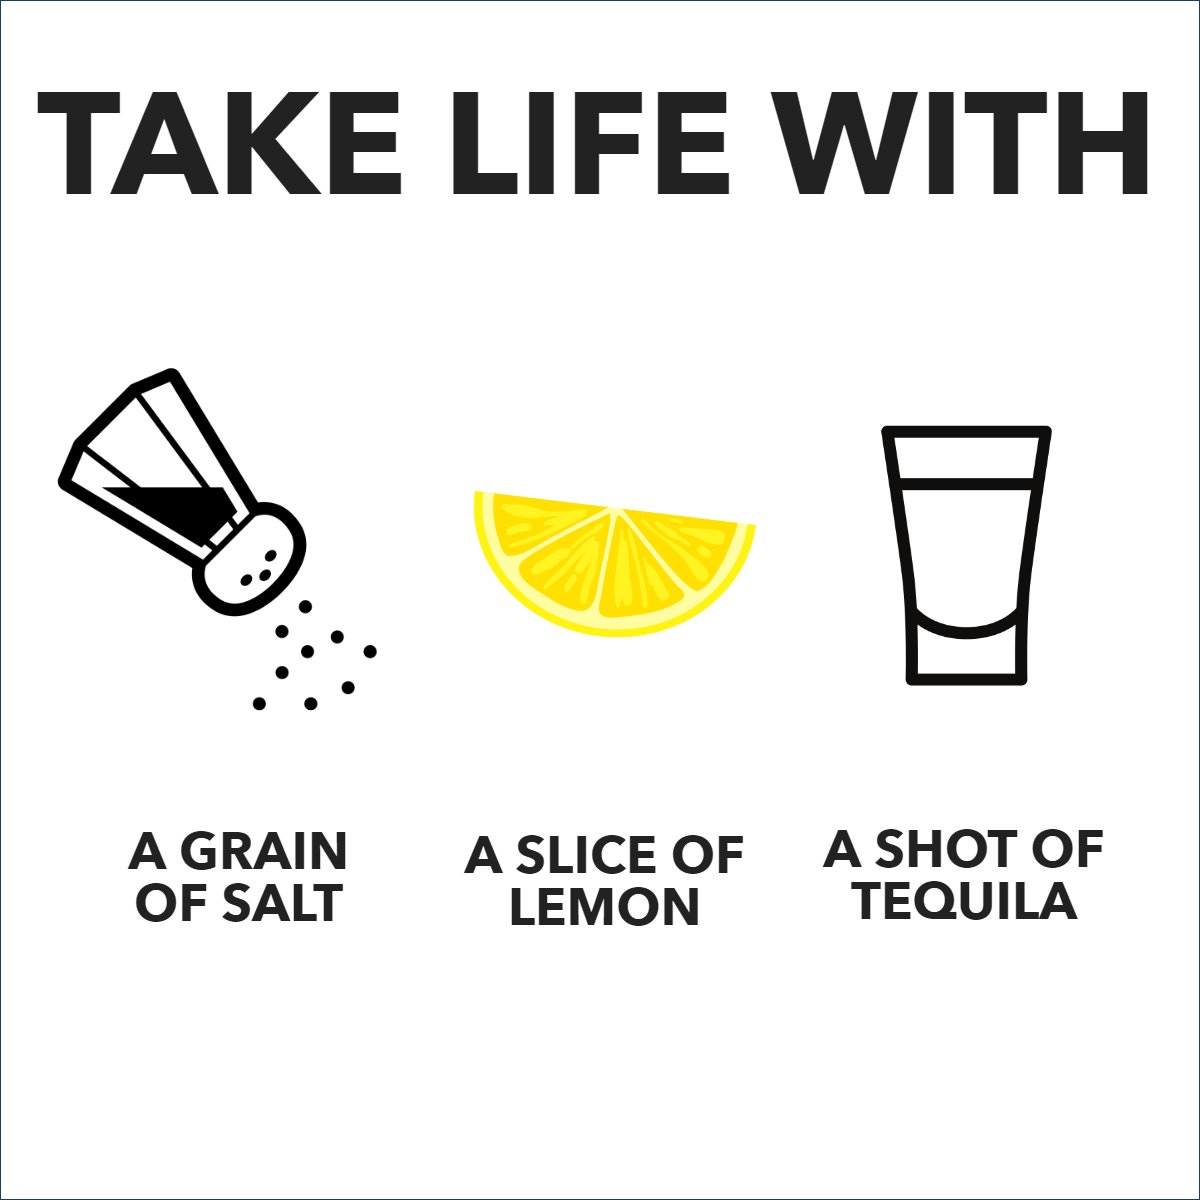 Take life with a grain of salt, a slice of lemon and a shot of tequila... 🧂🍋🥃

#lifeisbetteratthebeach    #tequilashots    #makelifebetter    #lemonslice    #tequilashot    #positive    #positivethinking
#thesalazargrouphawaii #corcoranpacifichawaii